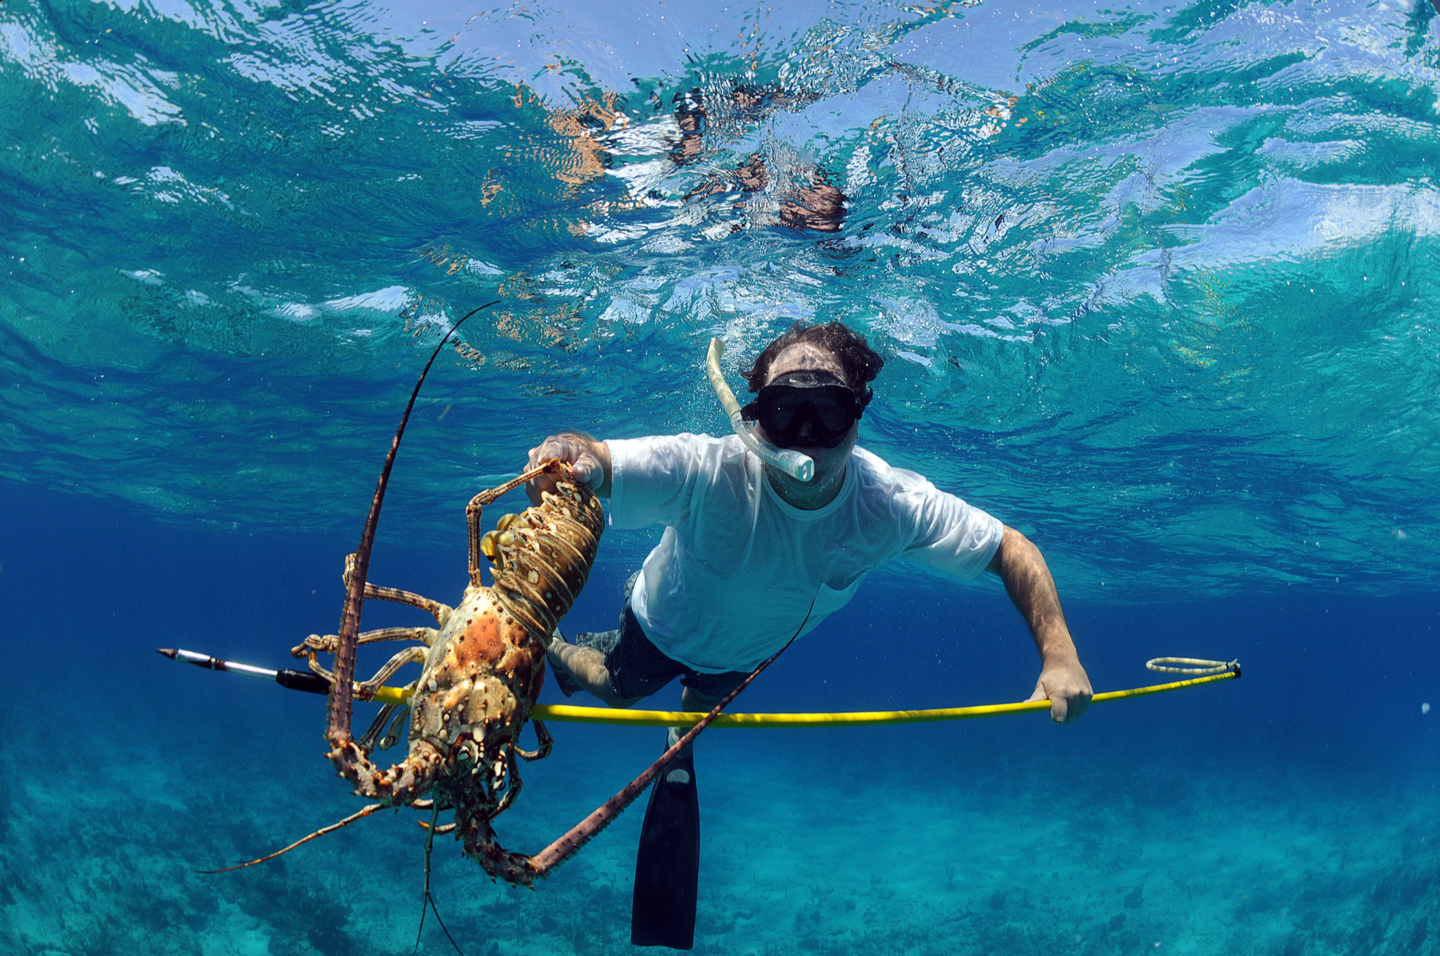 An underwater image showing spearfishing for beginners – a diver in a t-shirtholding a Lobster he caught with a yellow pole spear